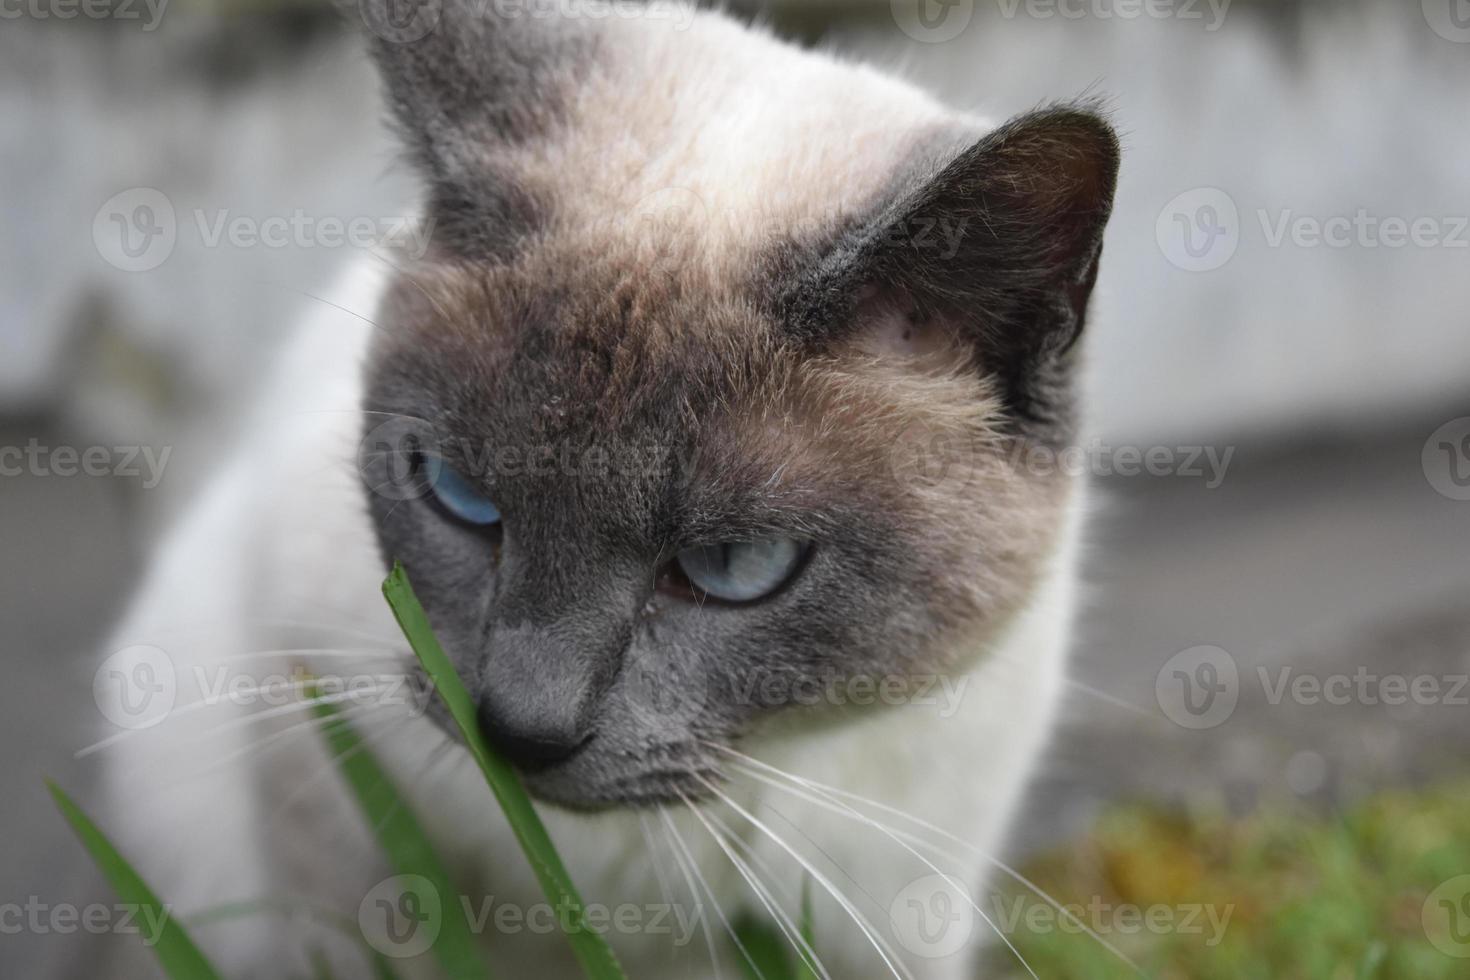 Blue Eyed Kitty Cat Eating a Blade of Grass photo